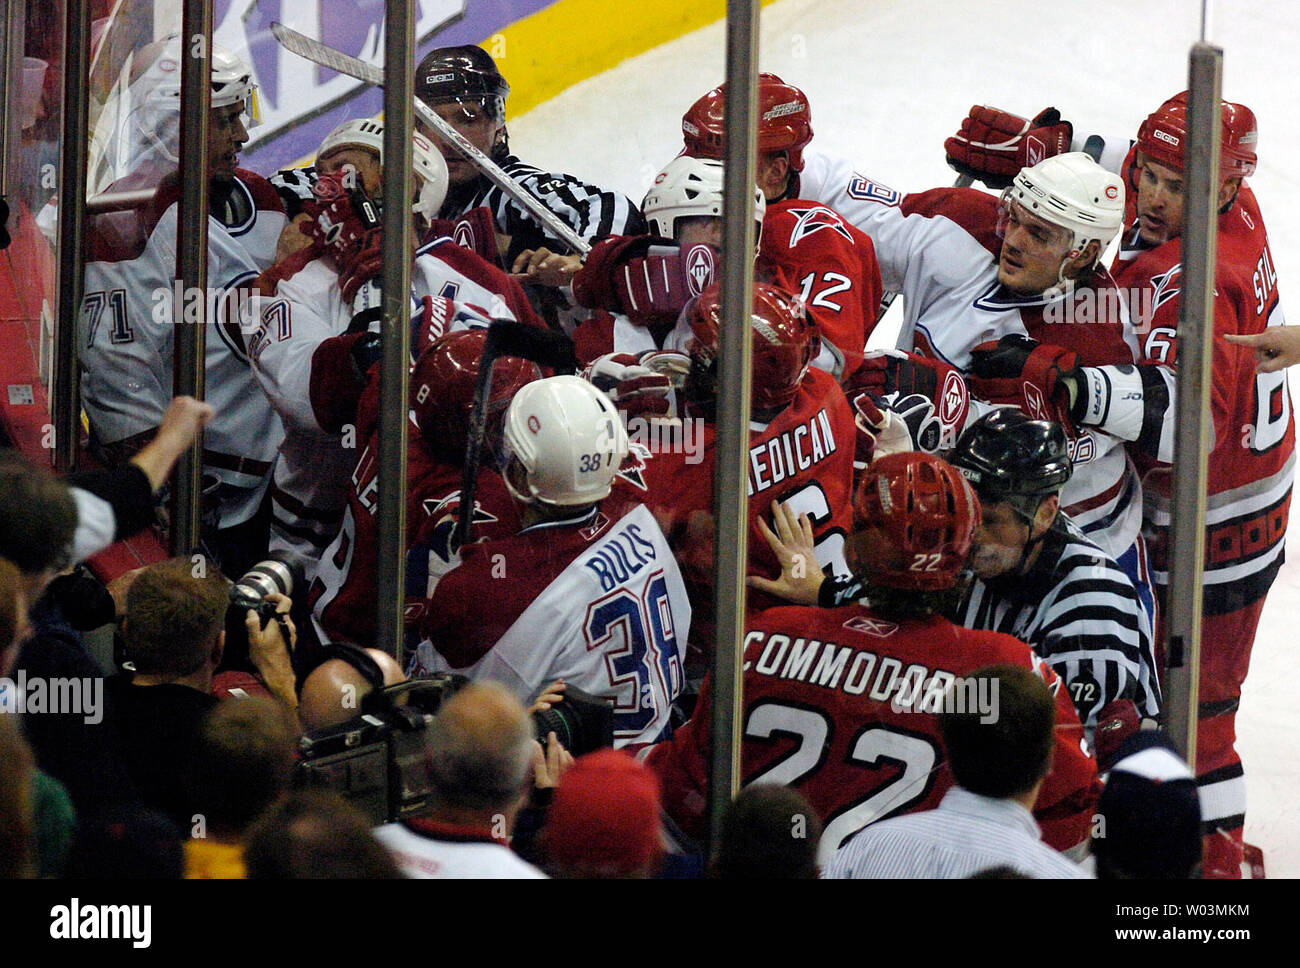 Members of the Montreal Canadiens and Carolina Hurricanes fight in a corner on the ice as the officials try to break up the crowd in the first period of Game 2 of the NHL Eastern Conference quaterfinals at the RBC Center in Raleigh, NC April 24, 2006.  (UPI Photo/Jeffrey A. Camarati) Stock Photo